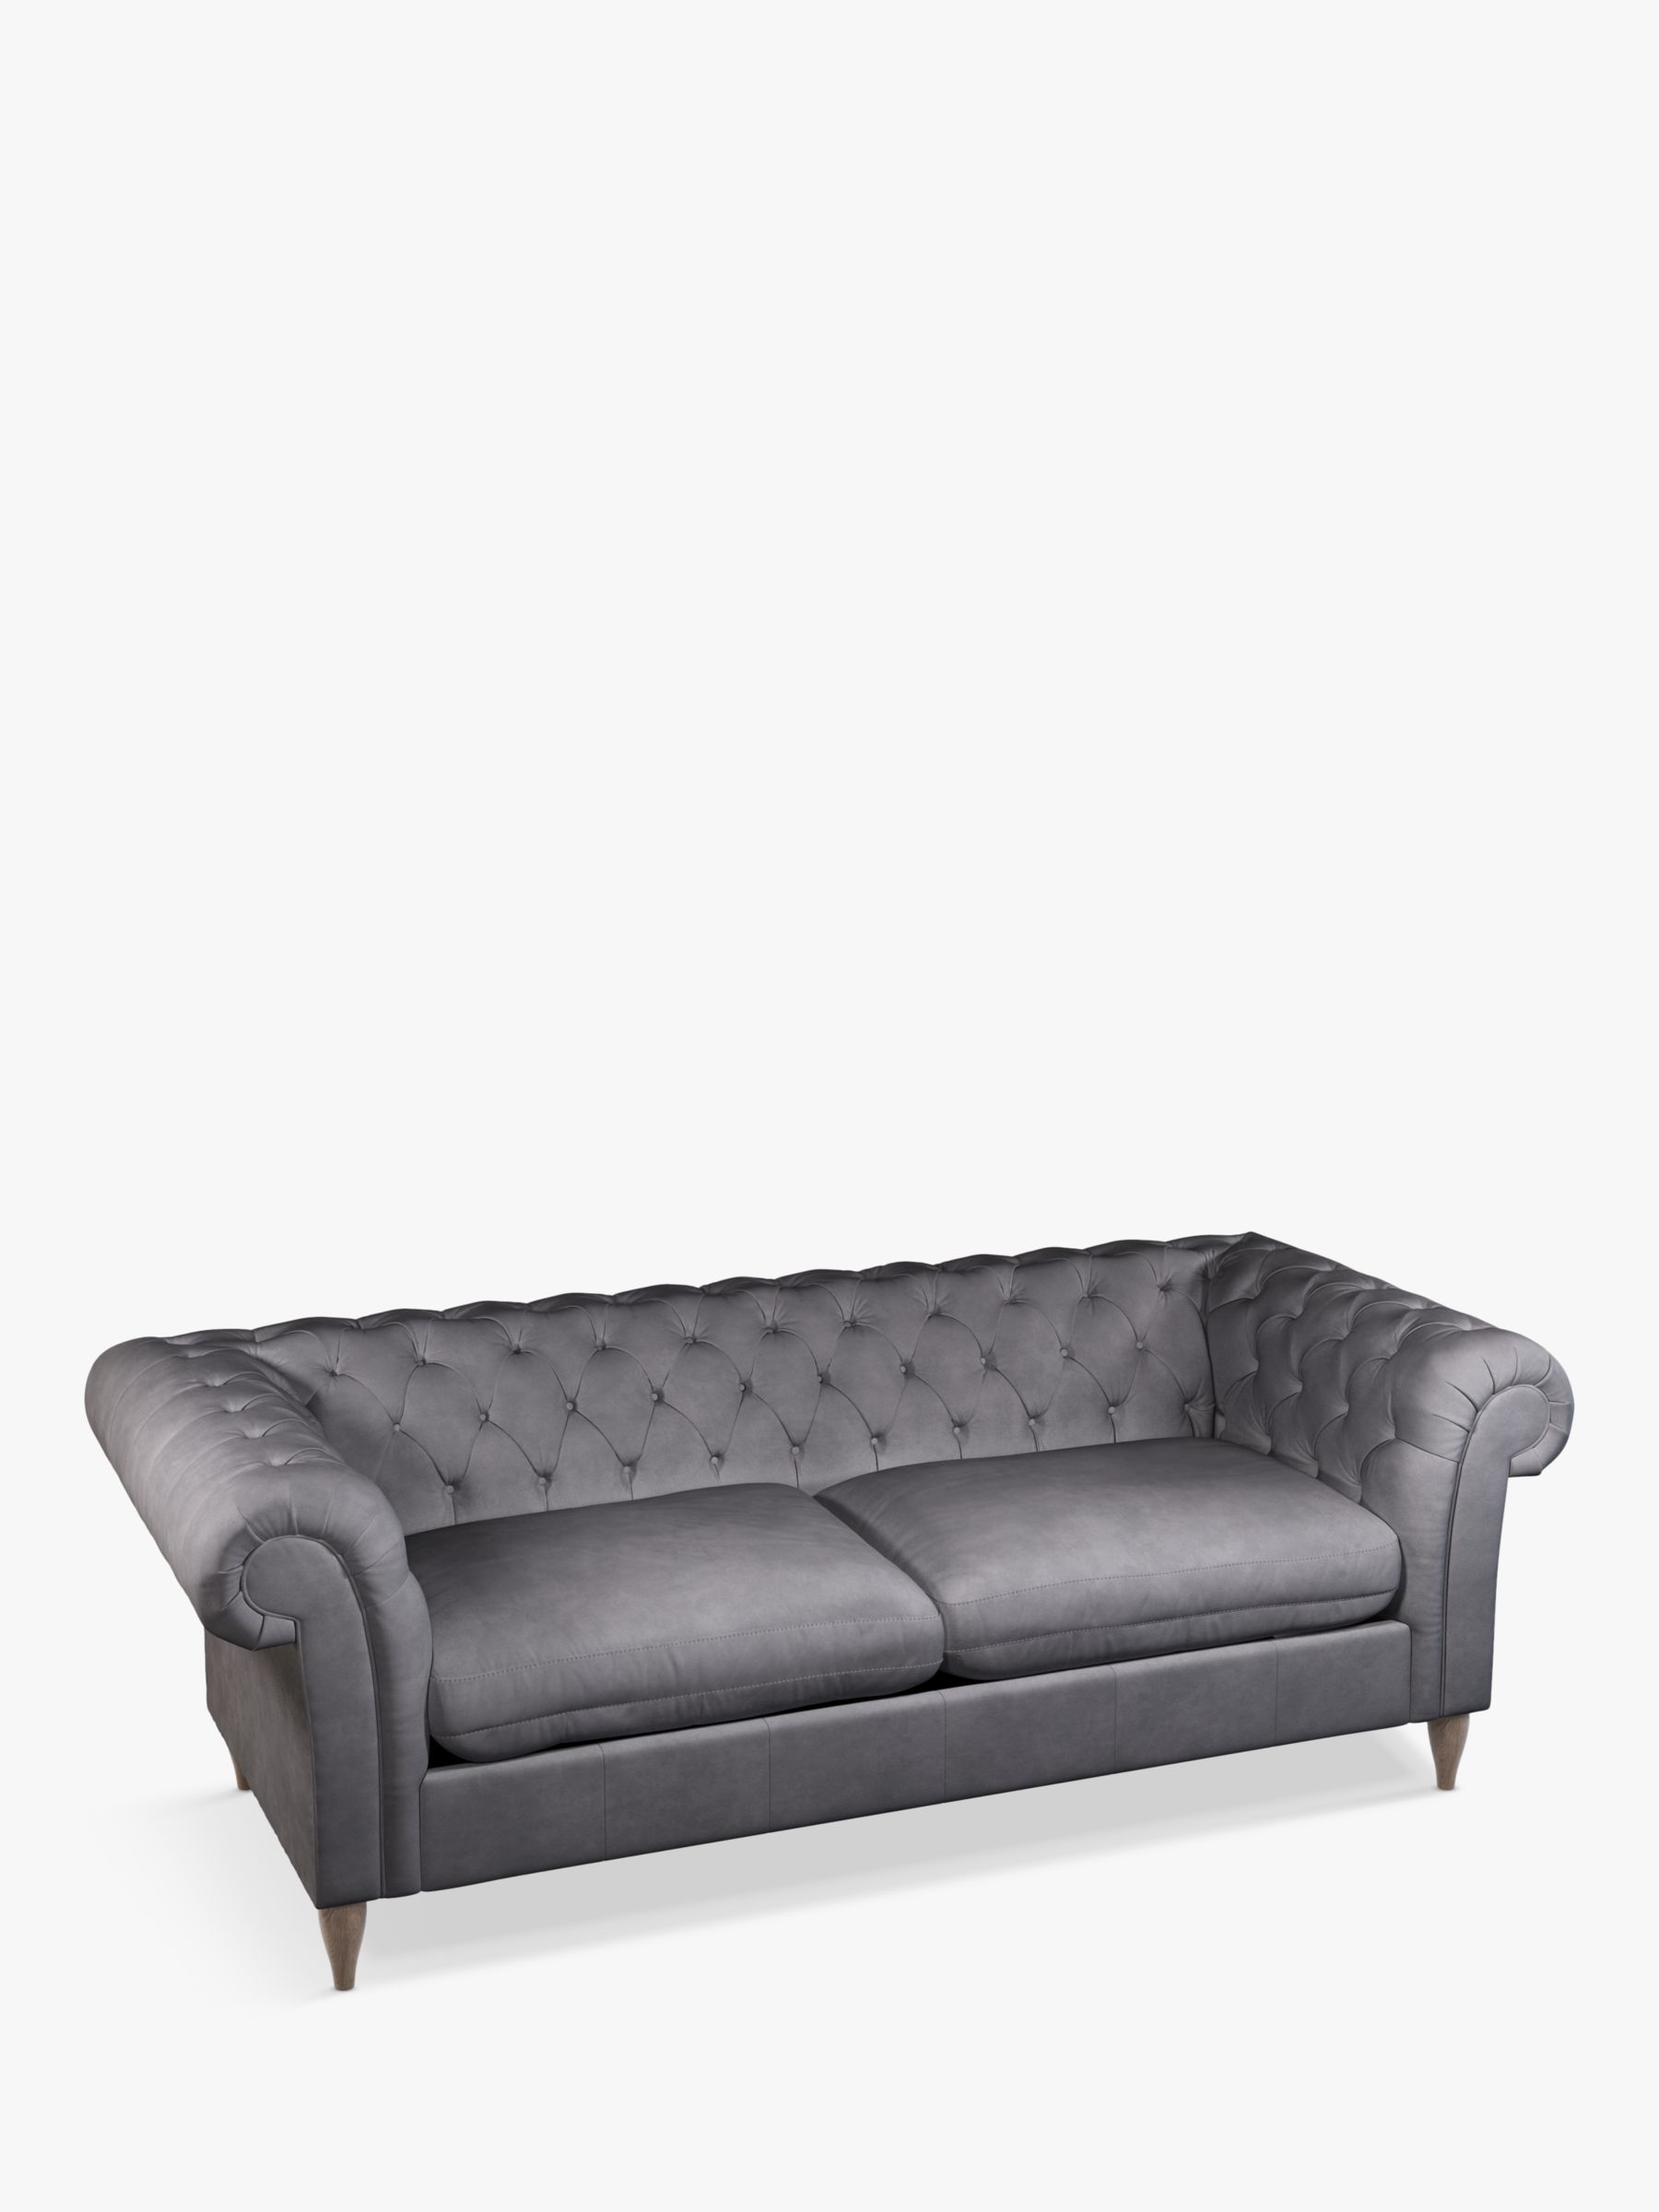 Cromwell Range, John Lewis Cromwell Chesterfield Double Leather Sofa Bed, Dark Leg, Soft Touch Grey